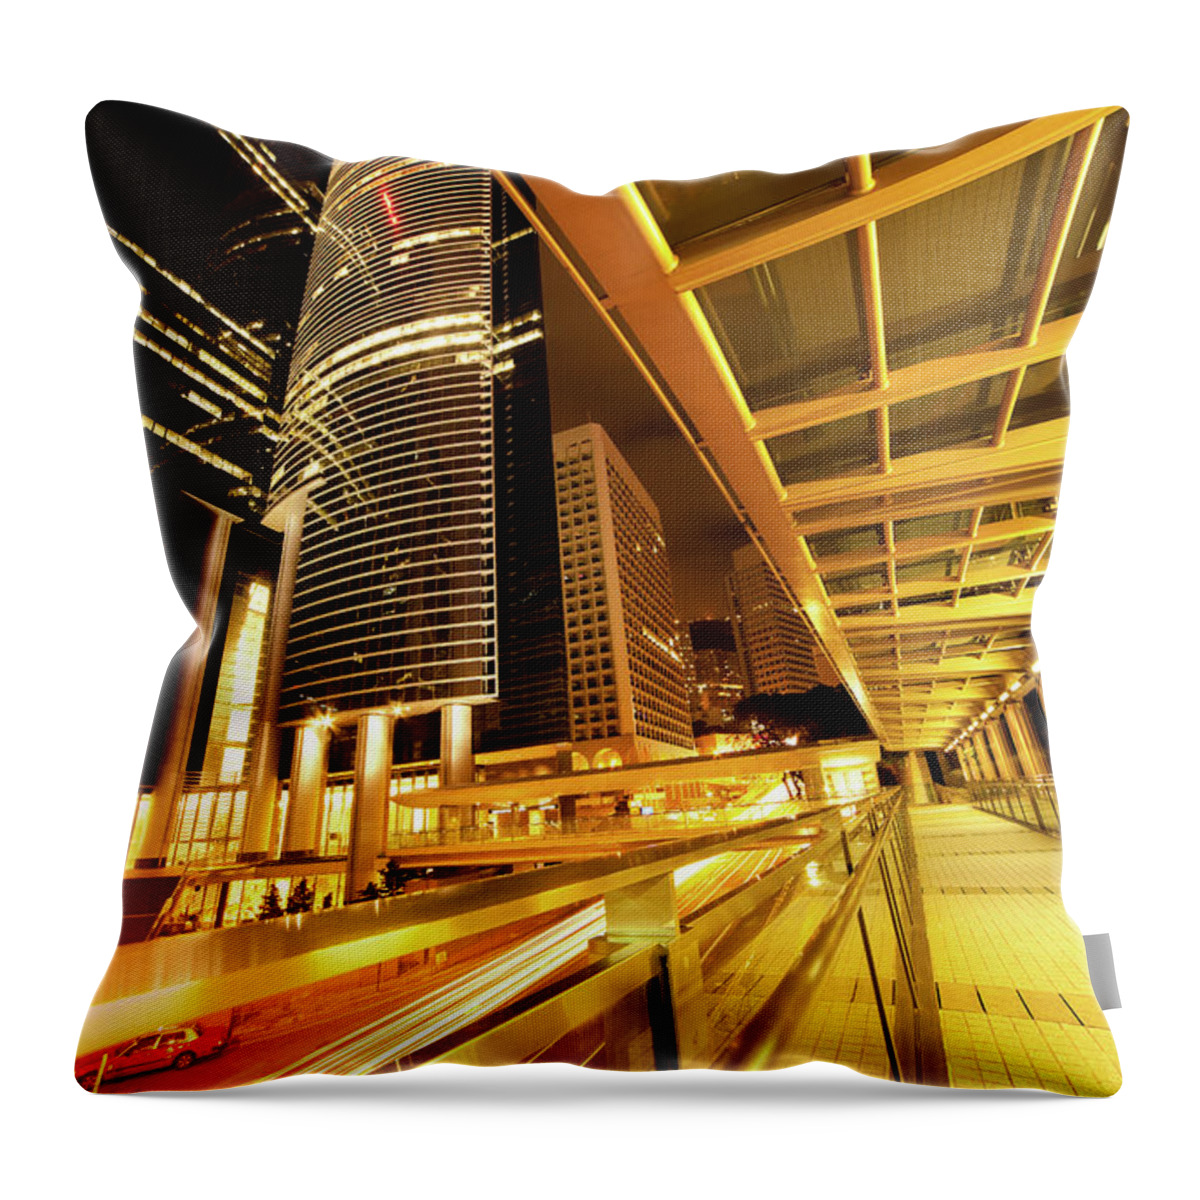 Chinese Culture Throw Pillow featuring the photograph Footbridge At Night In A Big City by Laoshi